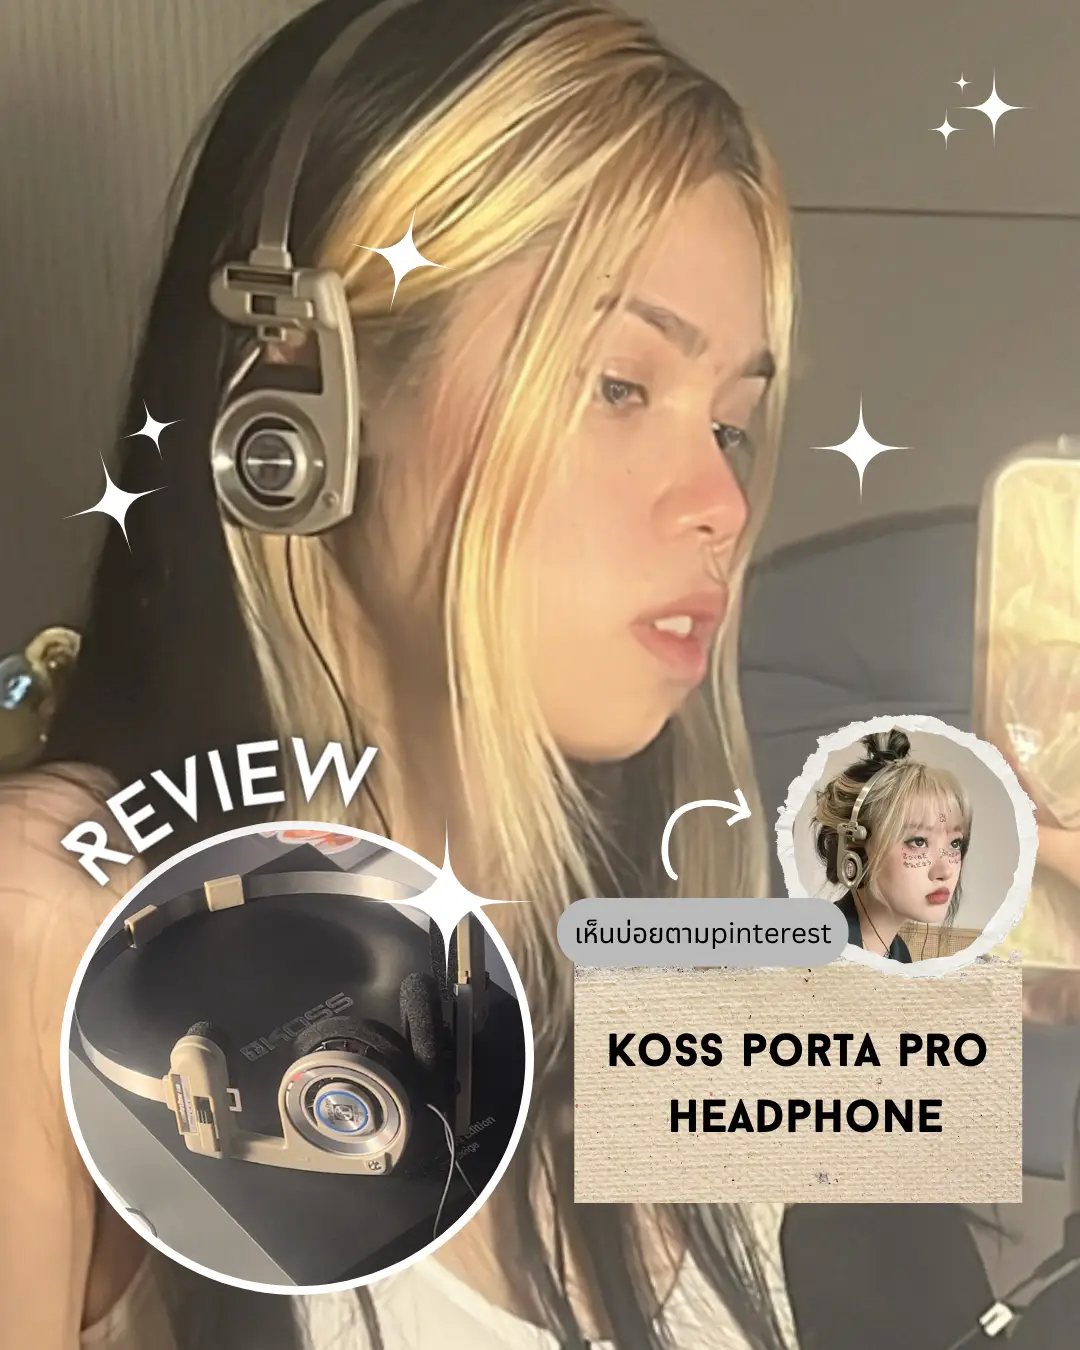 Frequently seen koss porta pro headphone review by influ pinterest